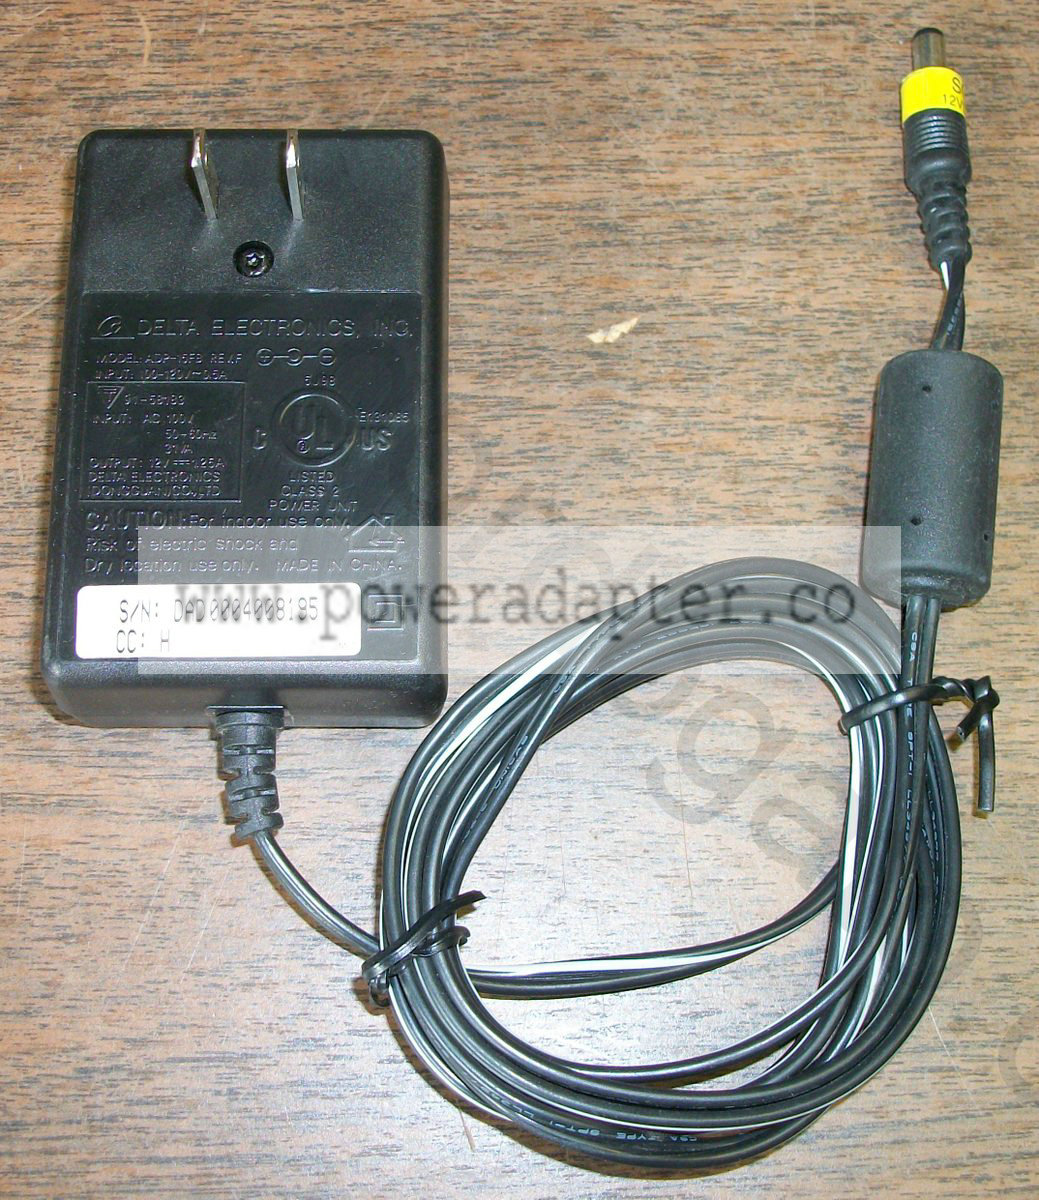 Delta ADP-15FB AC Adapter Power Cable for HP Scanners [ADP-15FB] Input: 100-120V~0.5A 60Hz Output: DC 12V 1.25A This - Click Image to Close